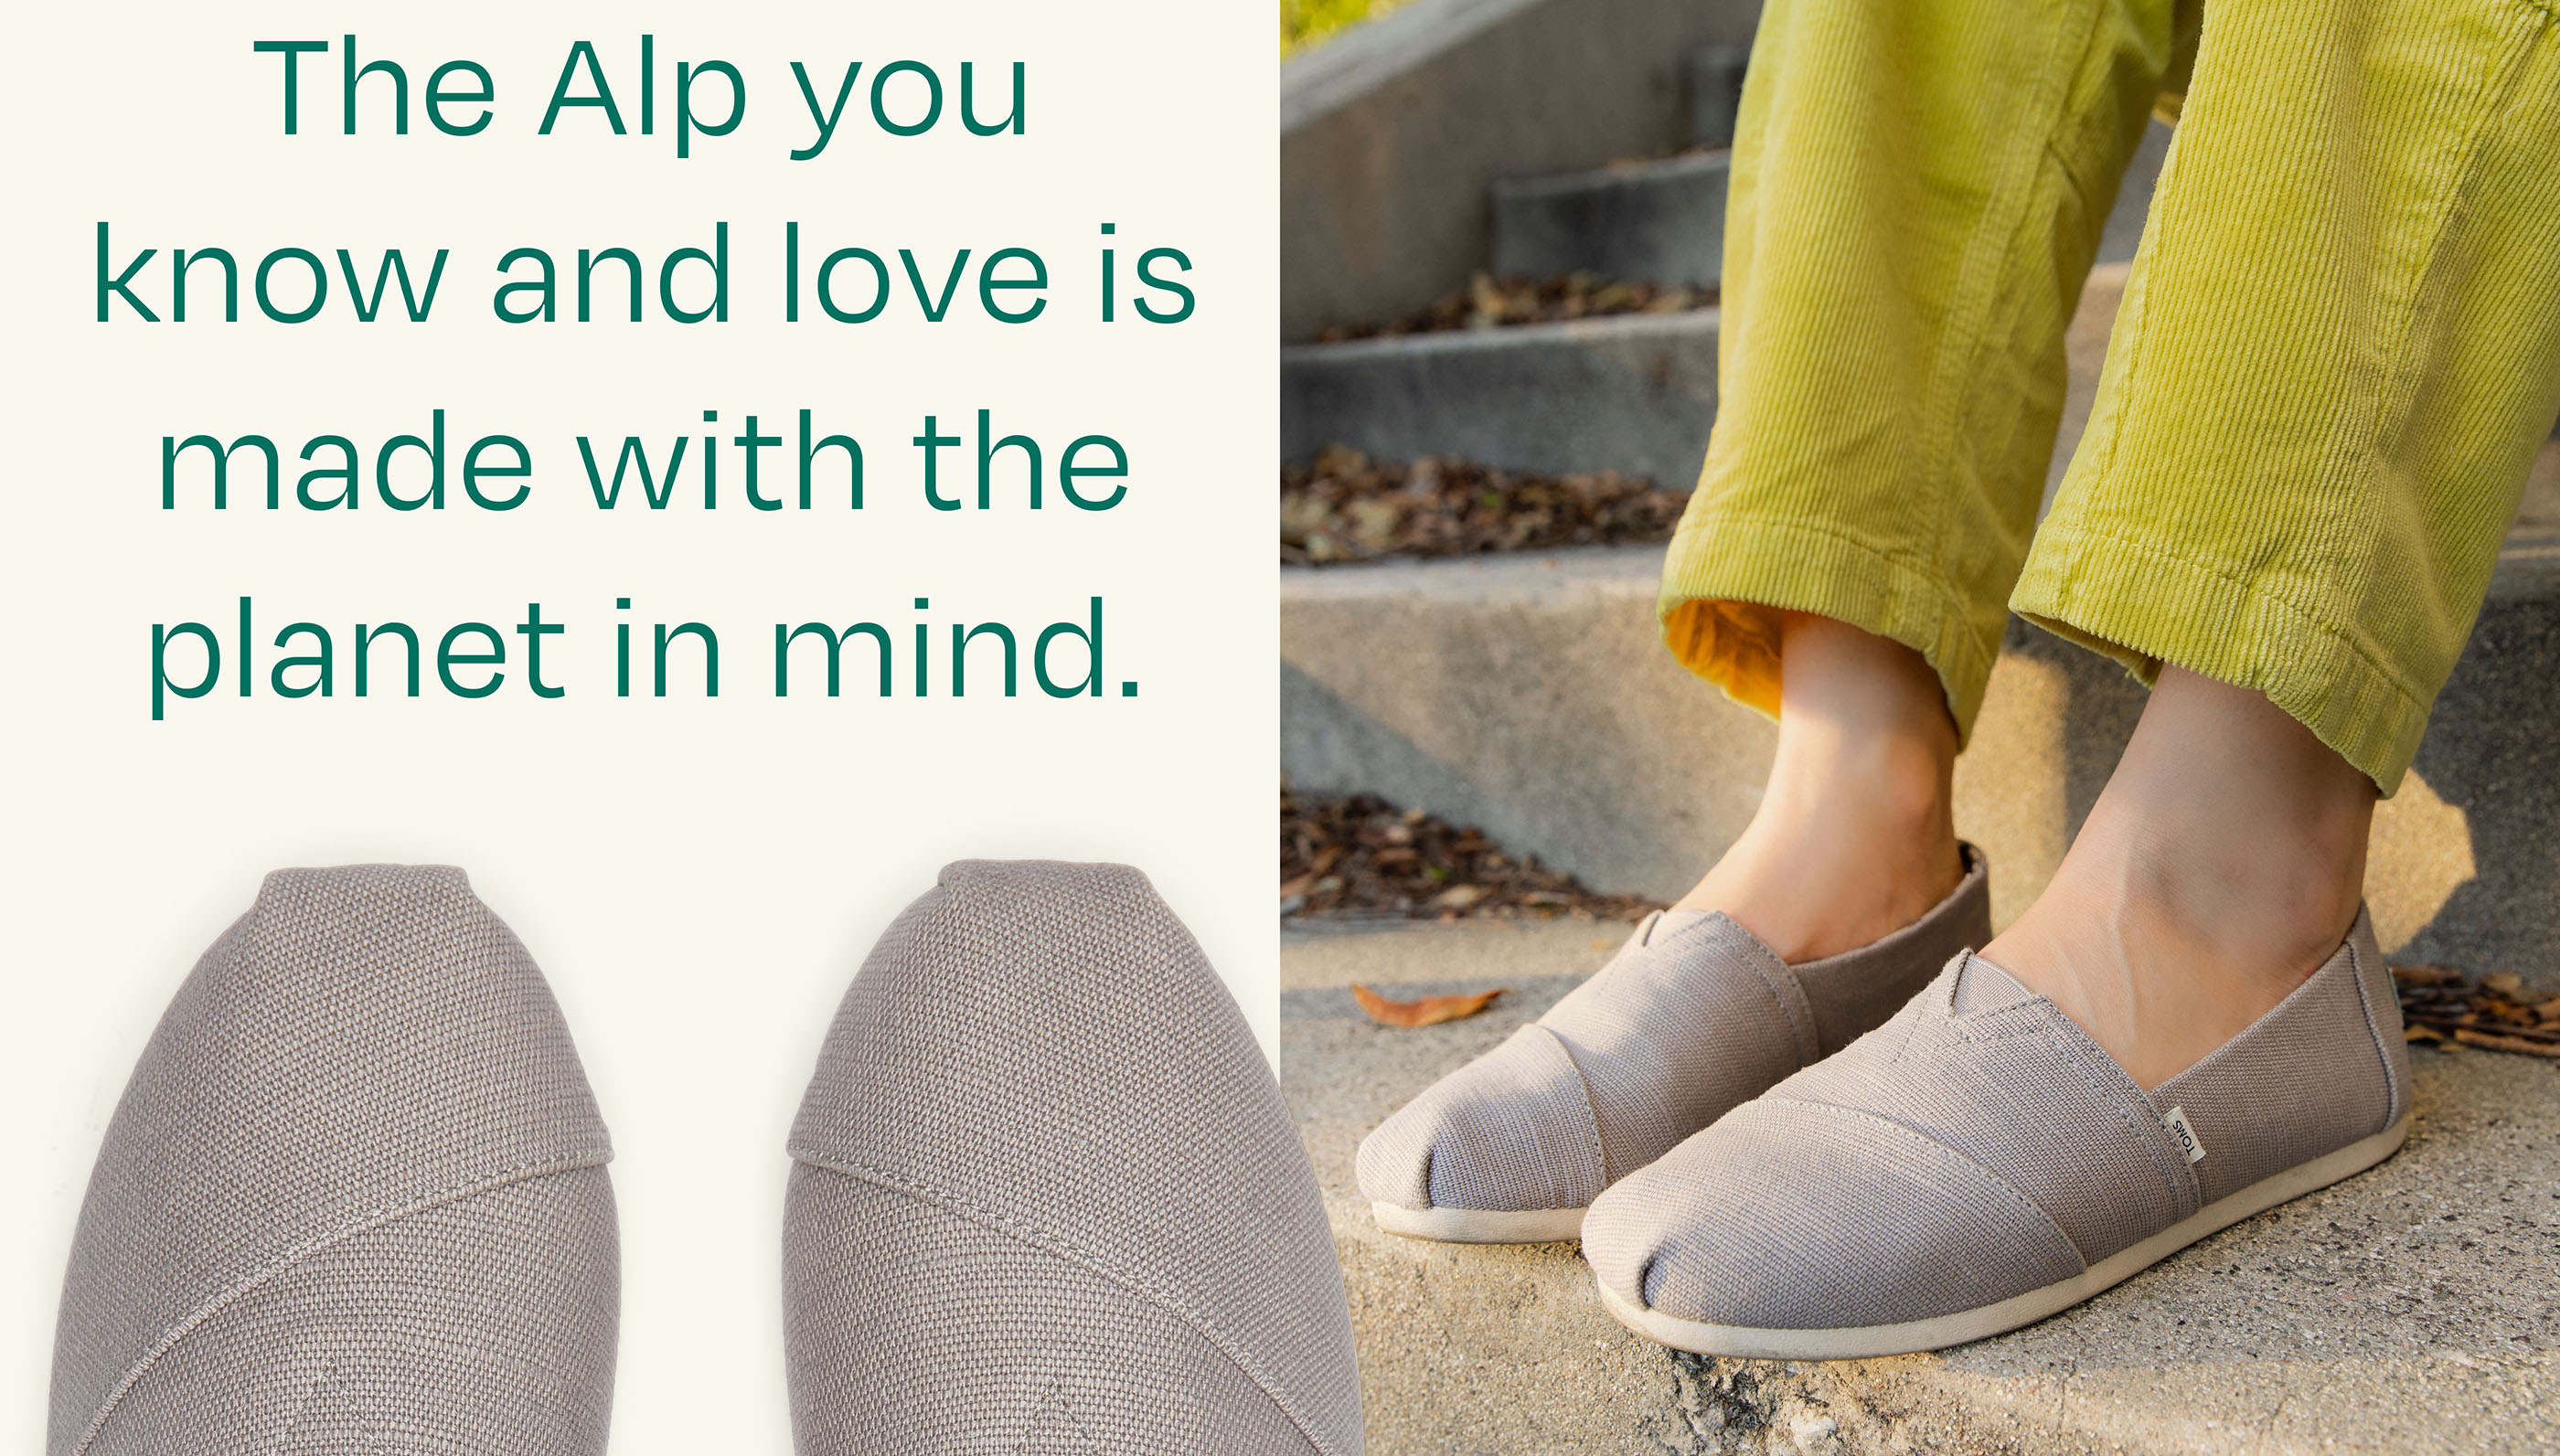 The Alp you know and love is made with the planet in mind. The Morning Dove Alpargata Heritage Canvas shown.